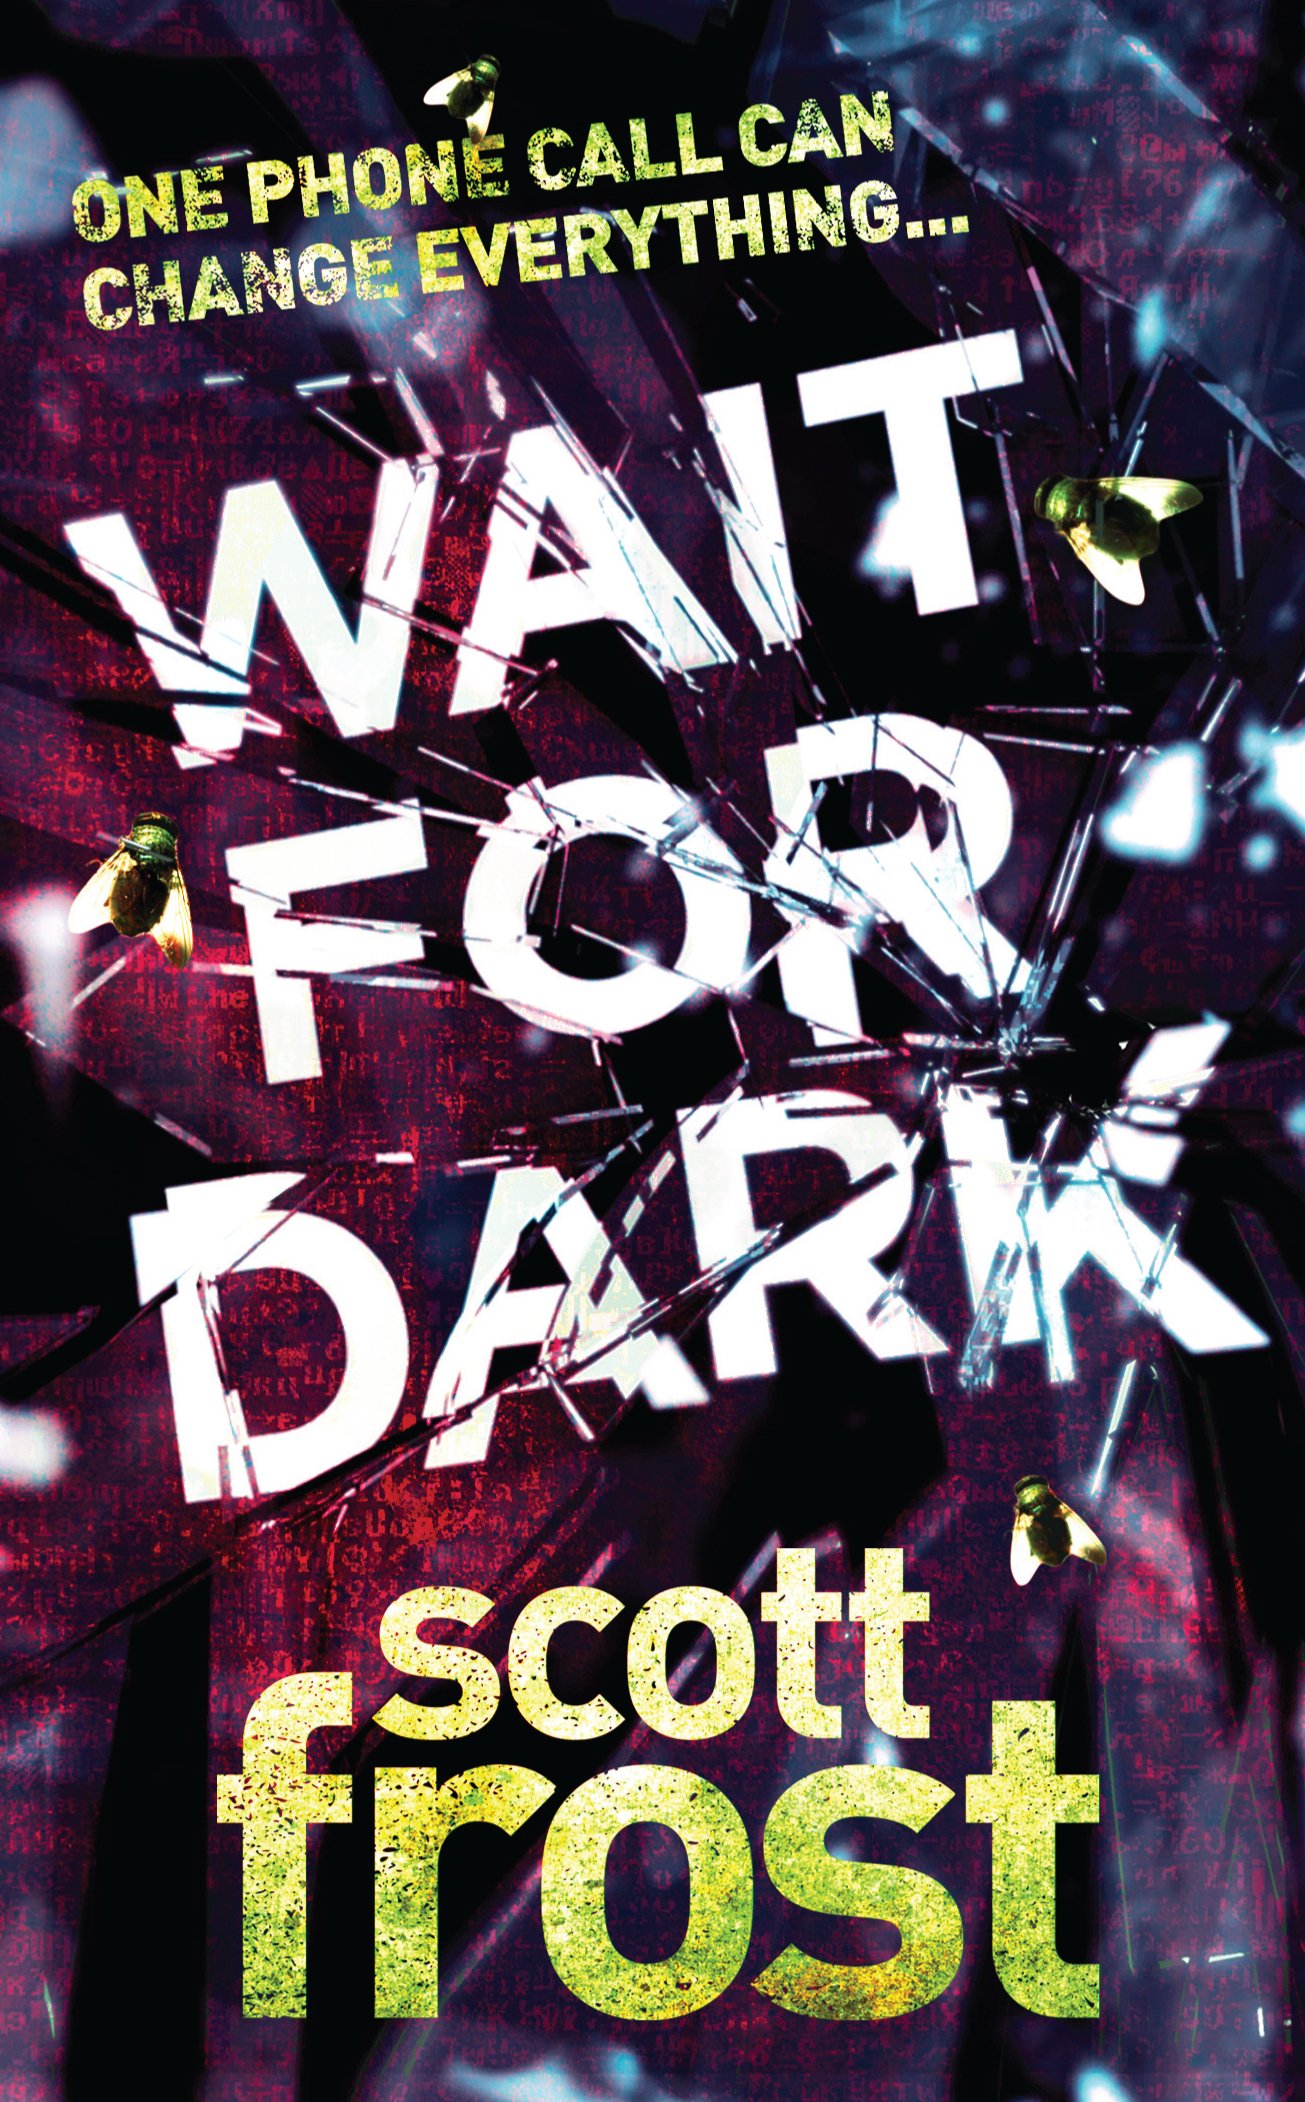 Book cover of Wait for Dark